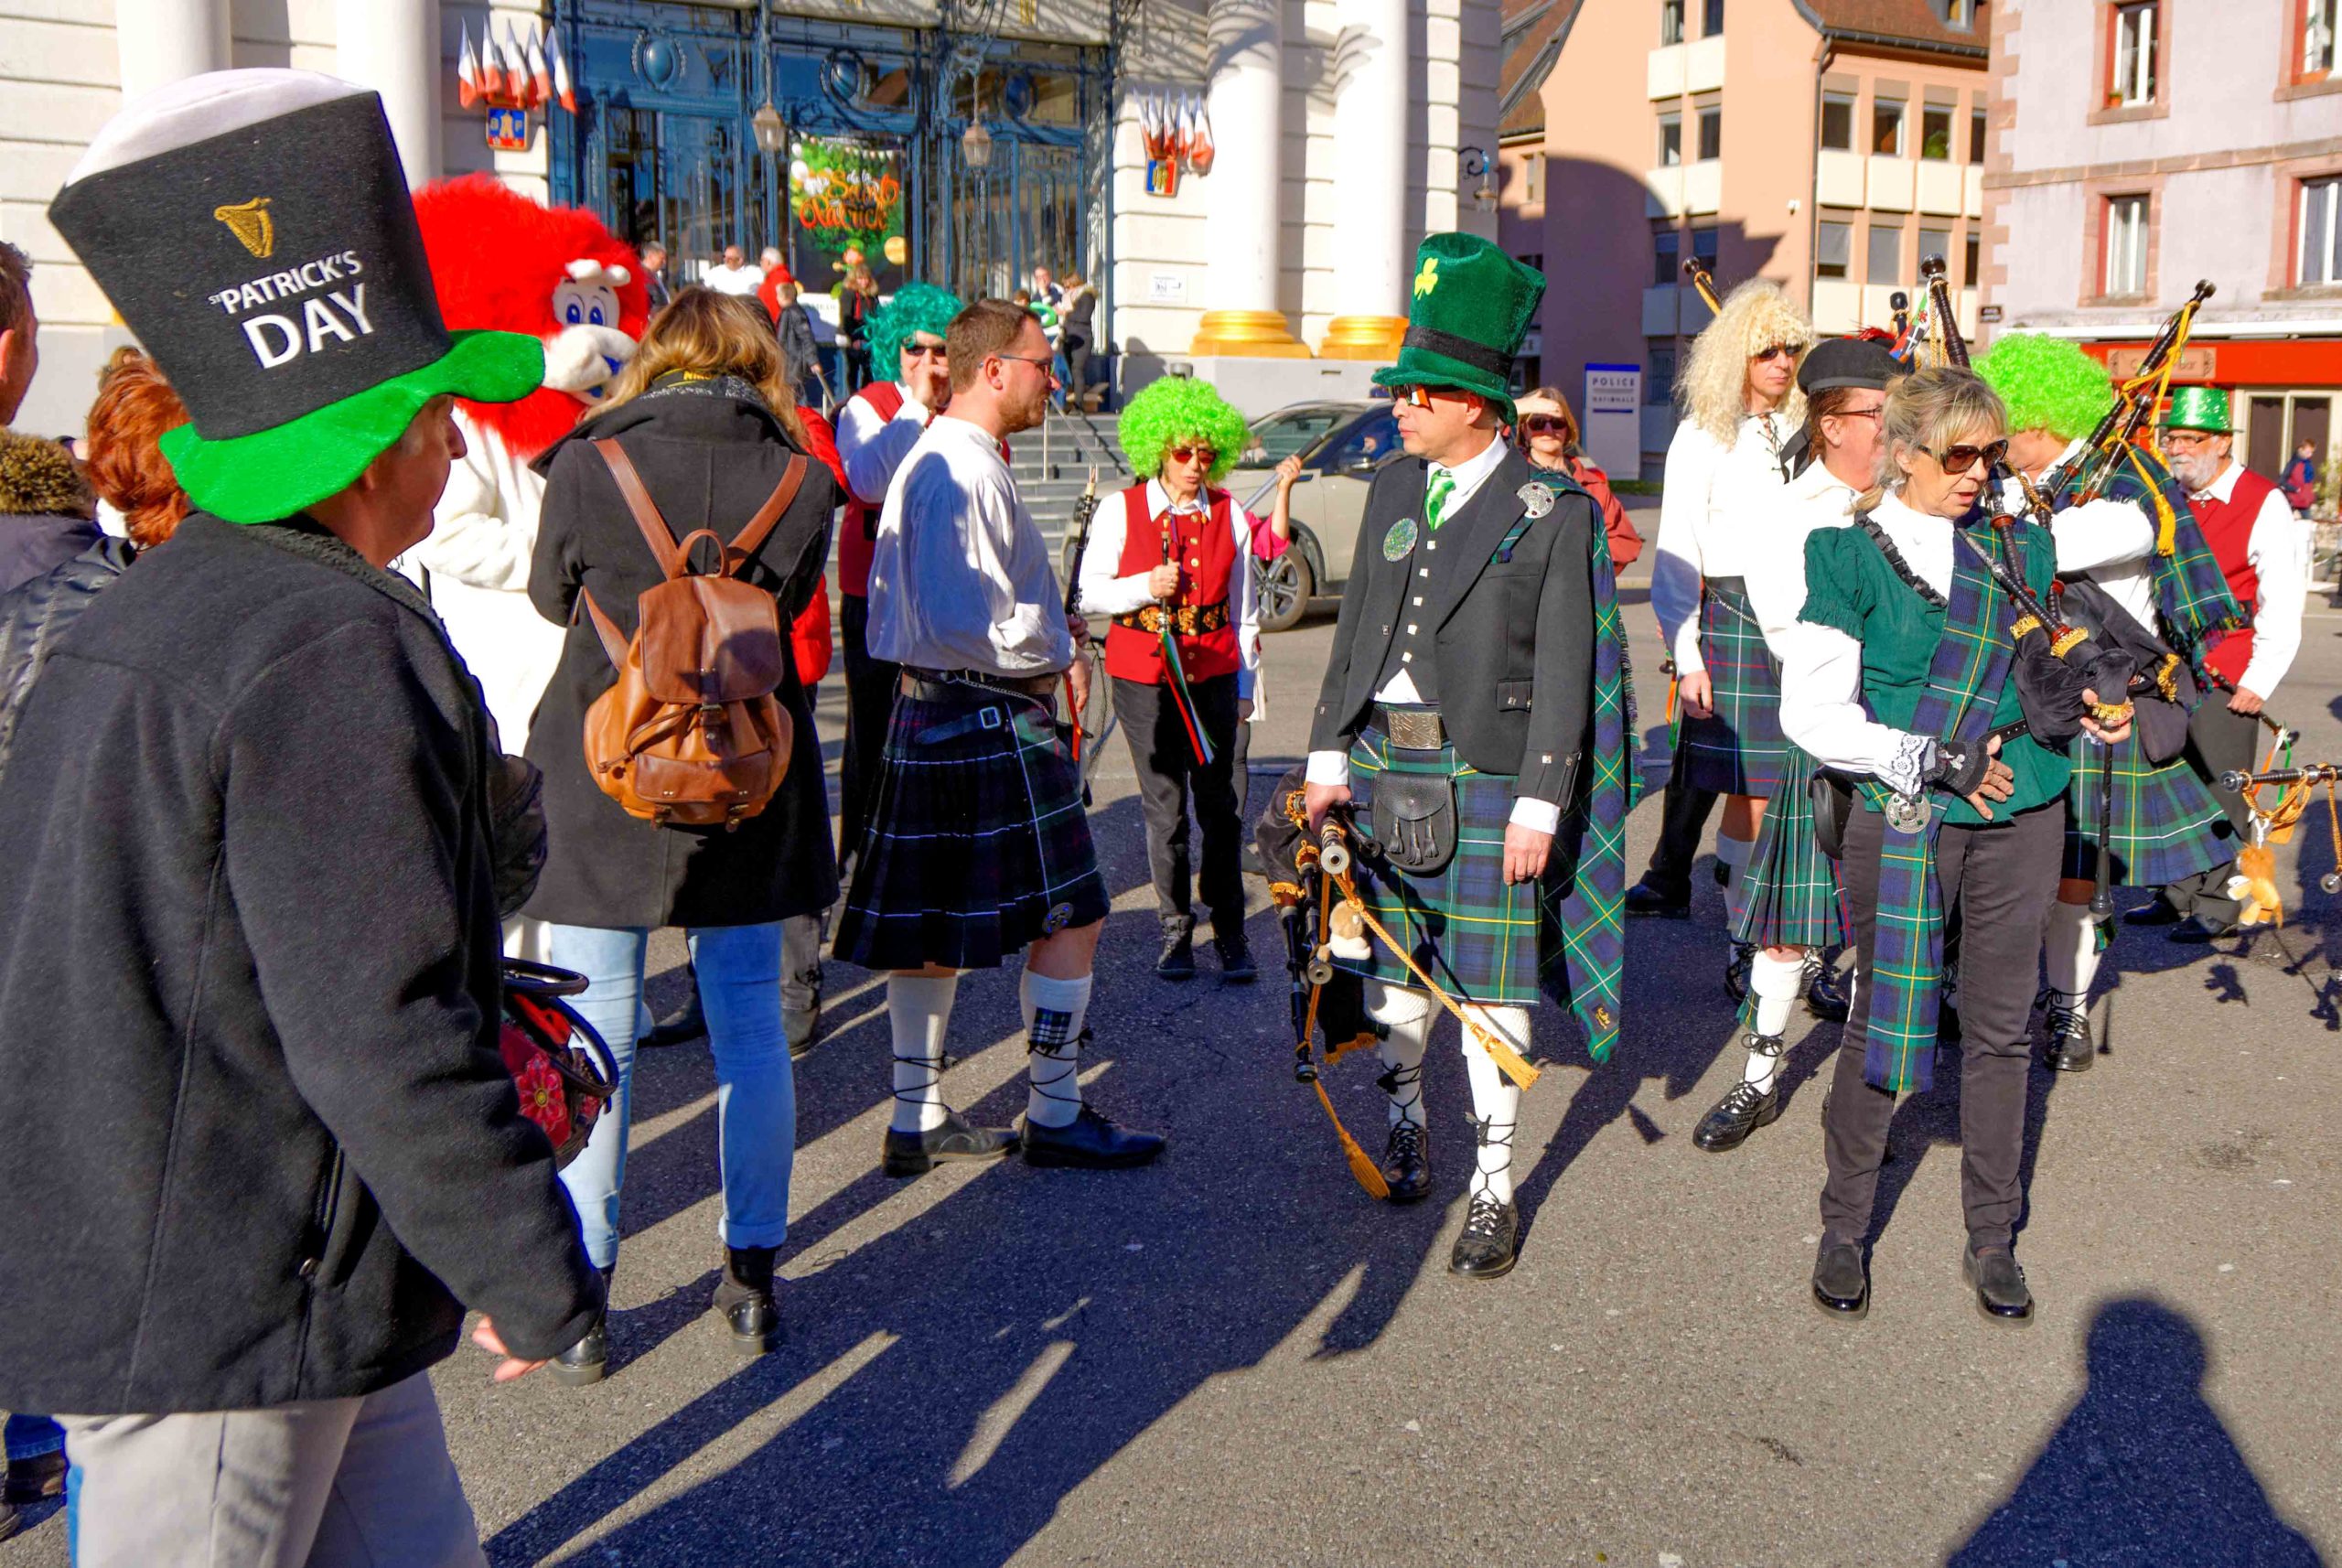 Saint Patrick's Day parade in Belfort (2019) © Thomas Bresson - licence [CC BY 4.0] from Wikimedia Commons